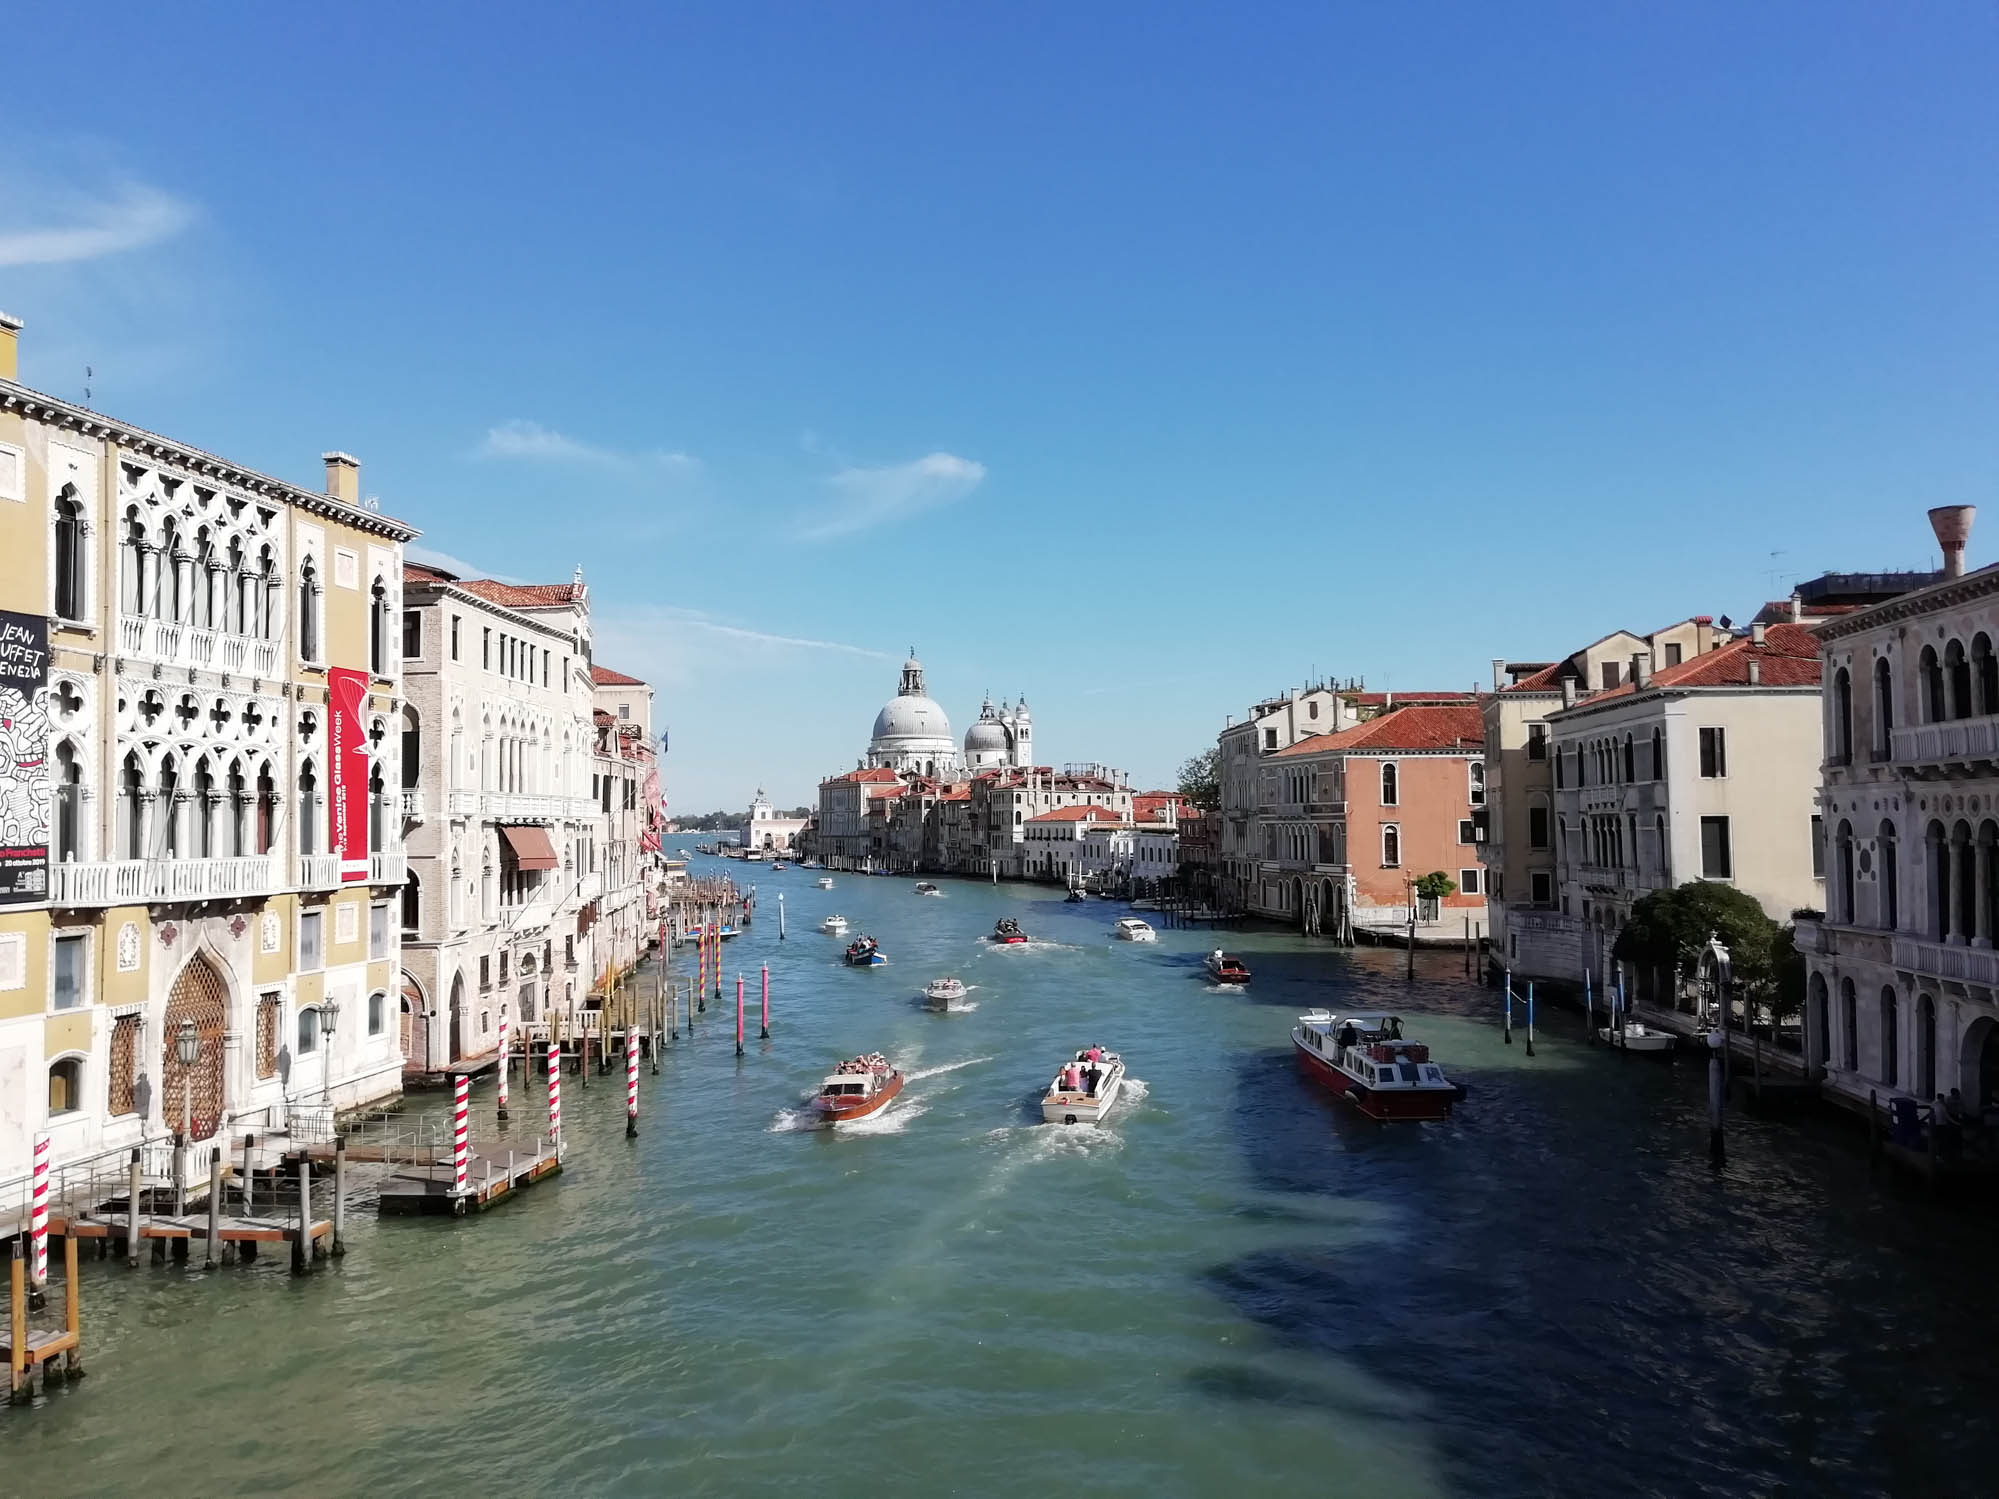 48 le grand canal